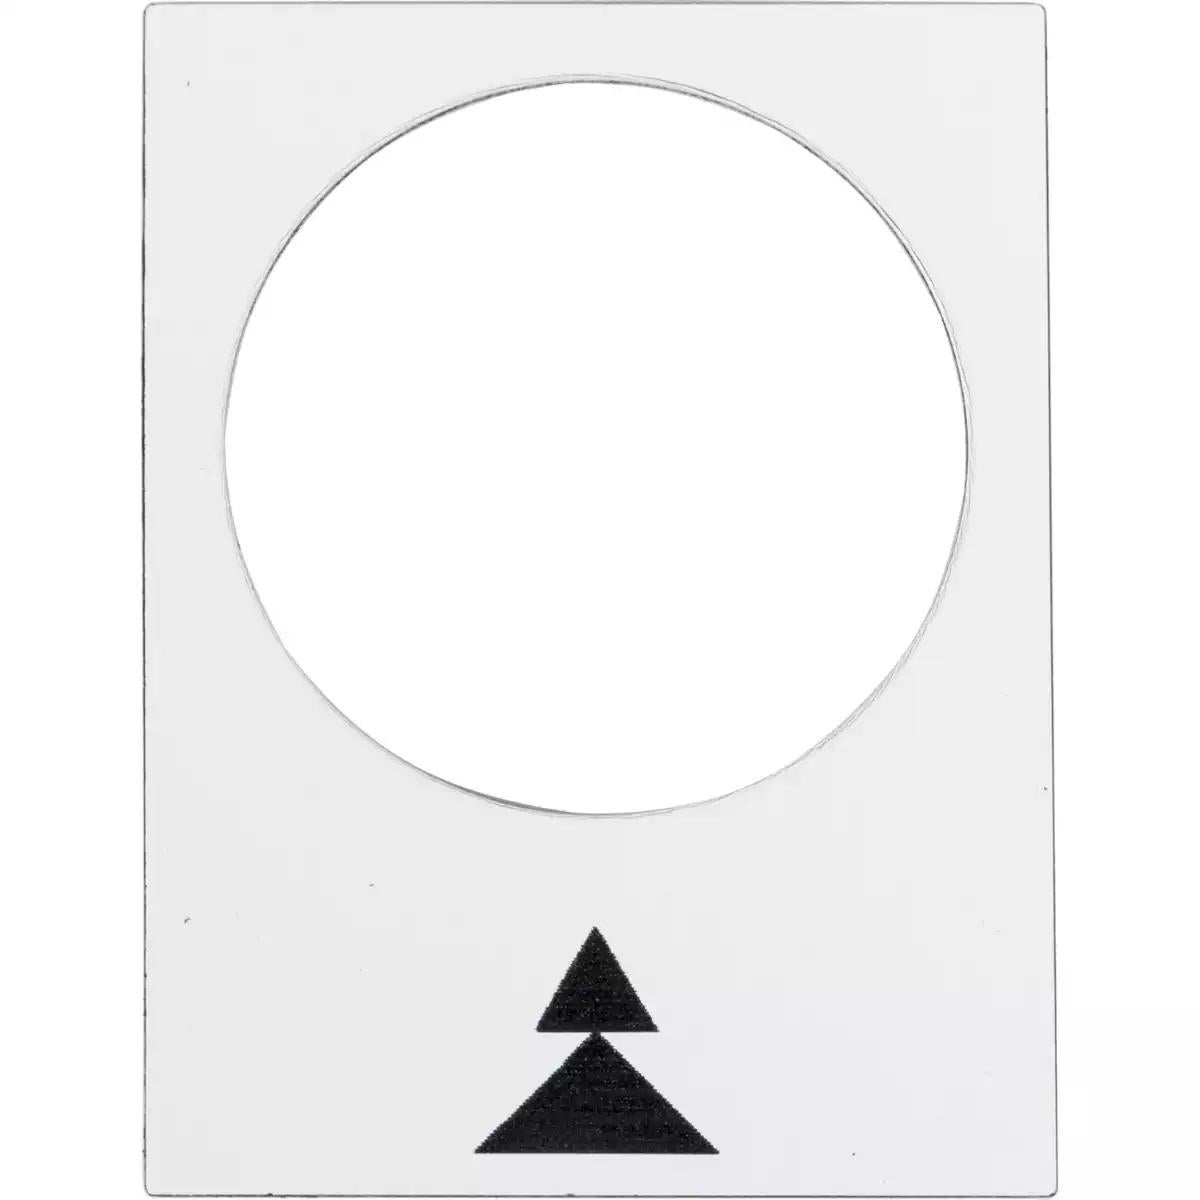 Harmony XAC, Marked Legend, Nameplate, 30 x 40mm, Plastic, White, 22mm Push Button, Black Marked up Double Arrowhead